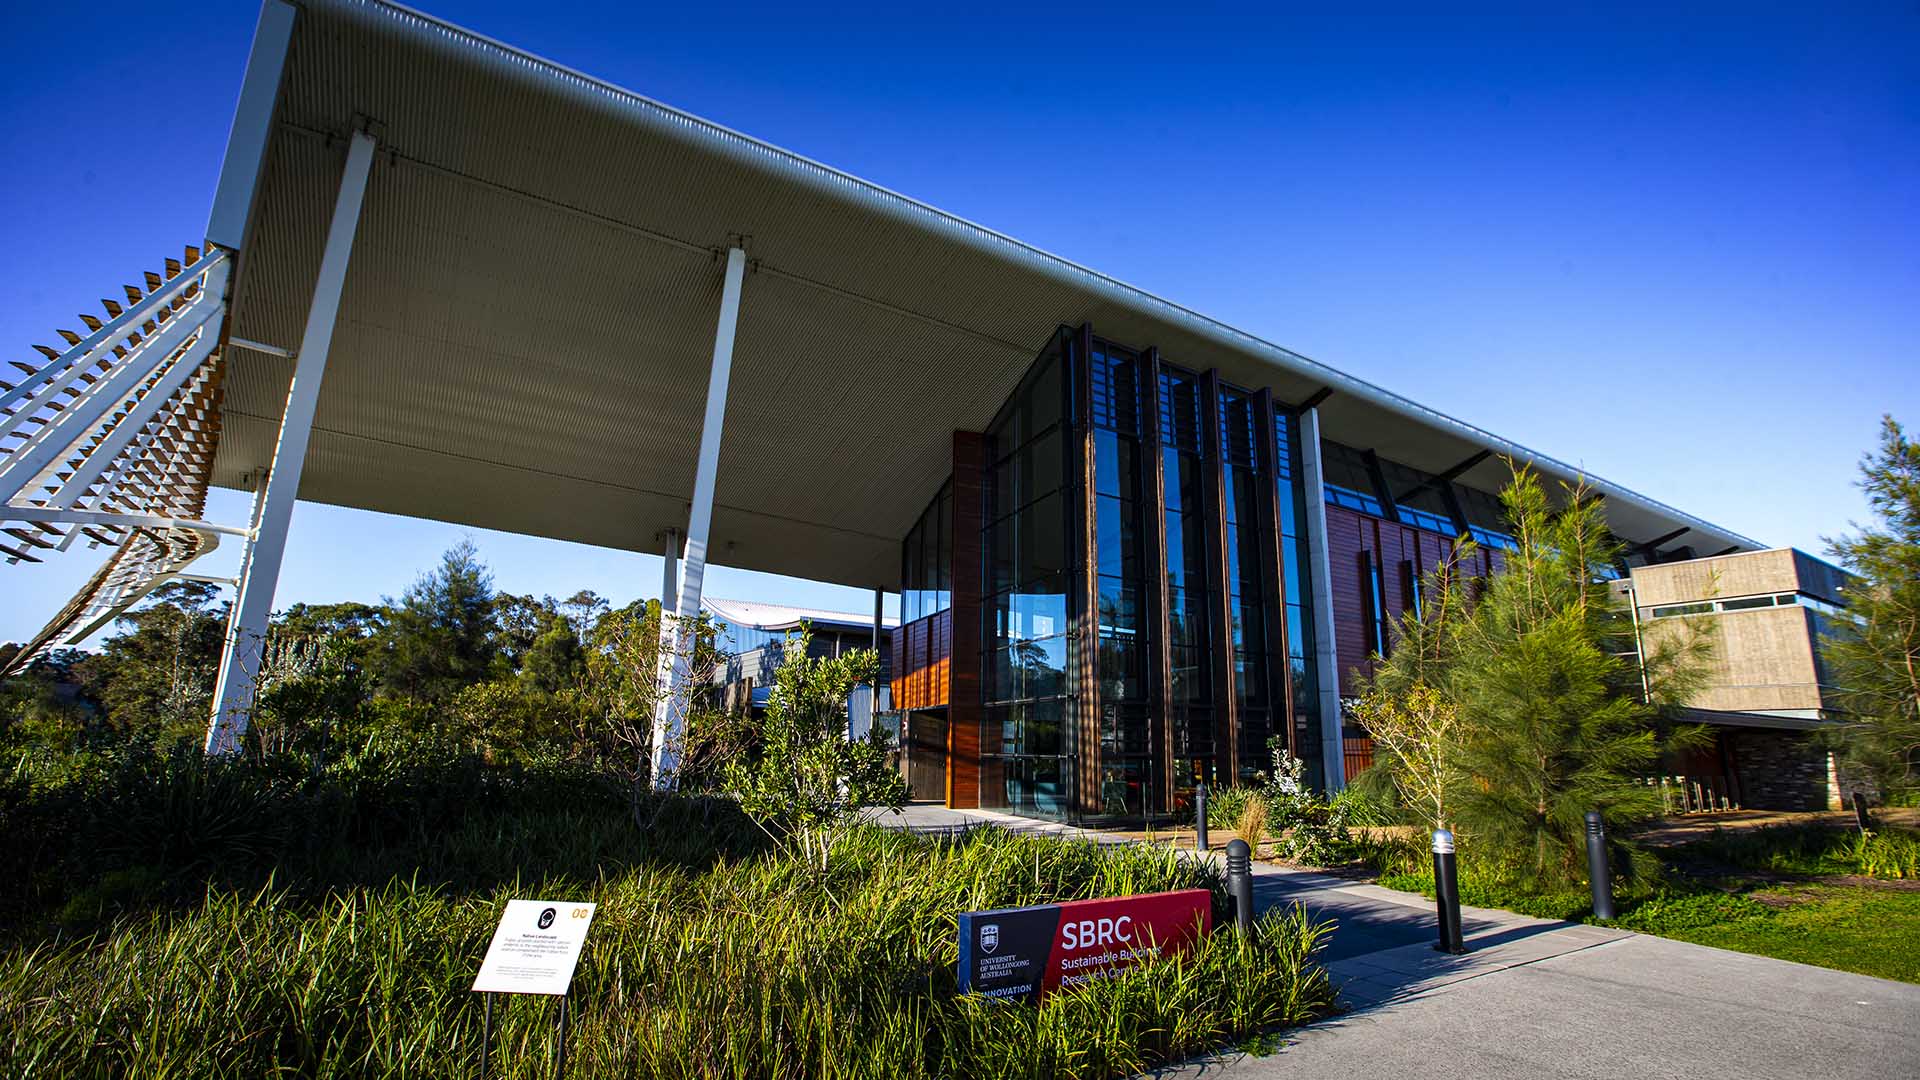 UOW home to Australia’s most sustainable building